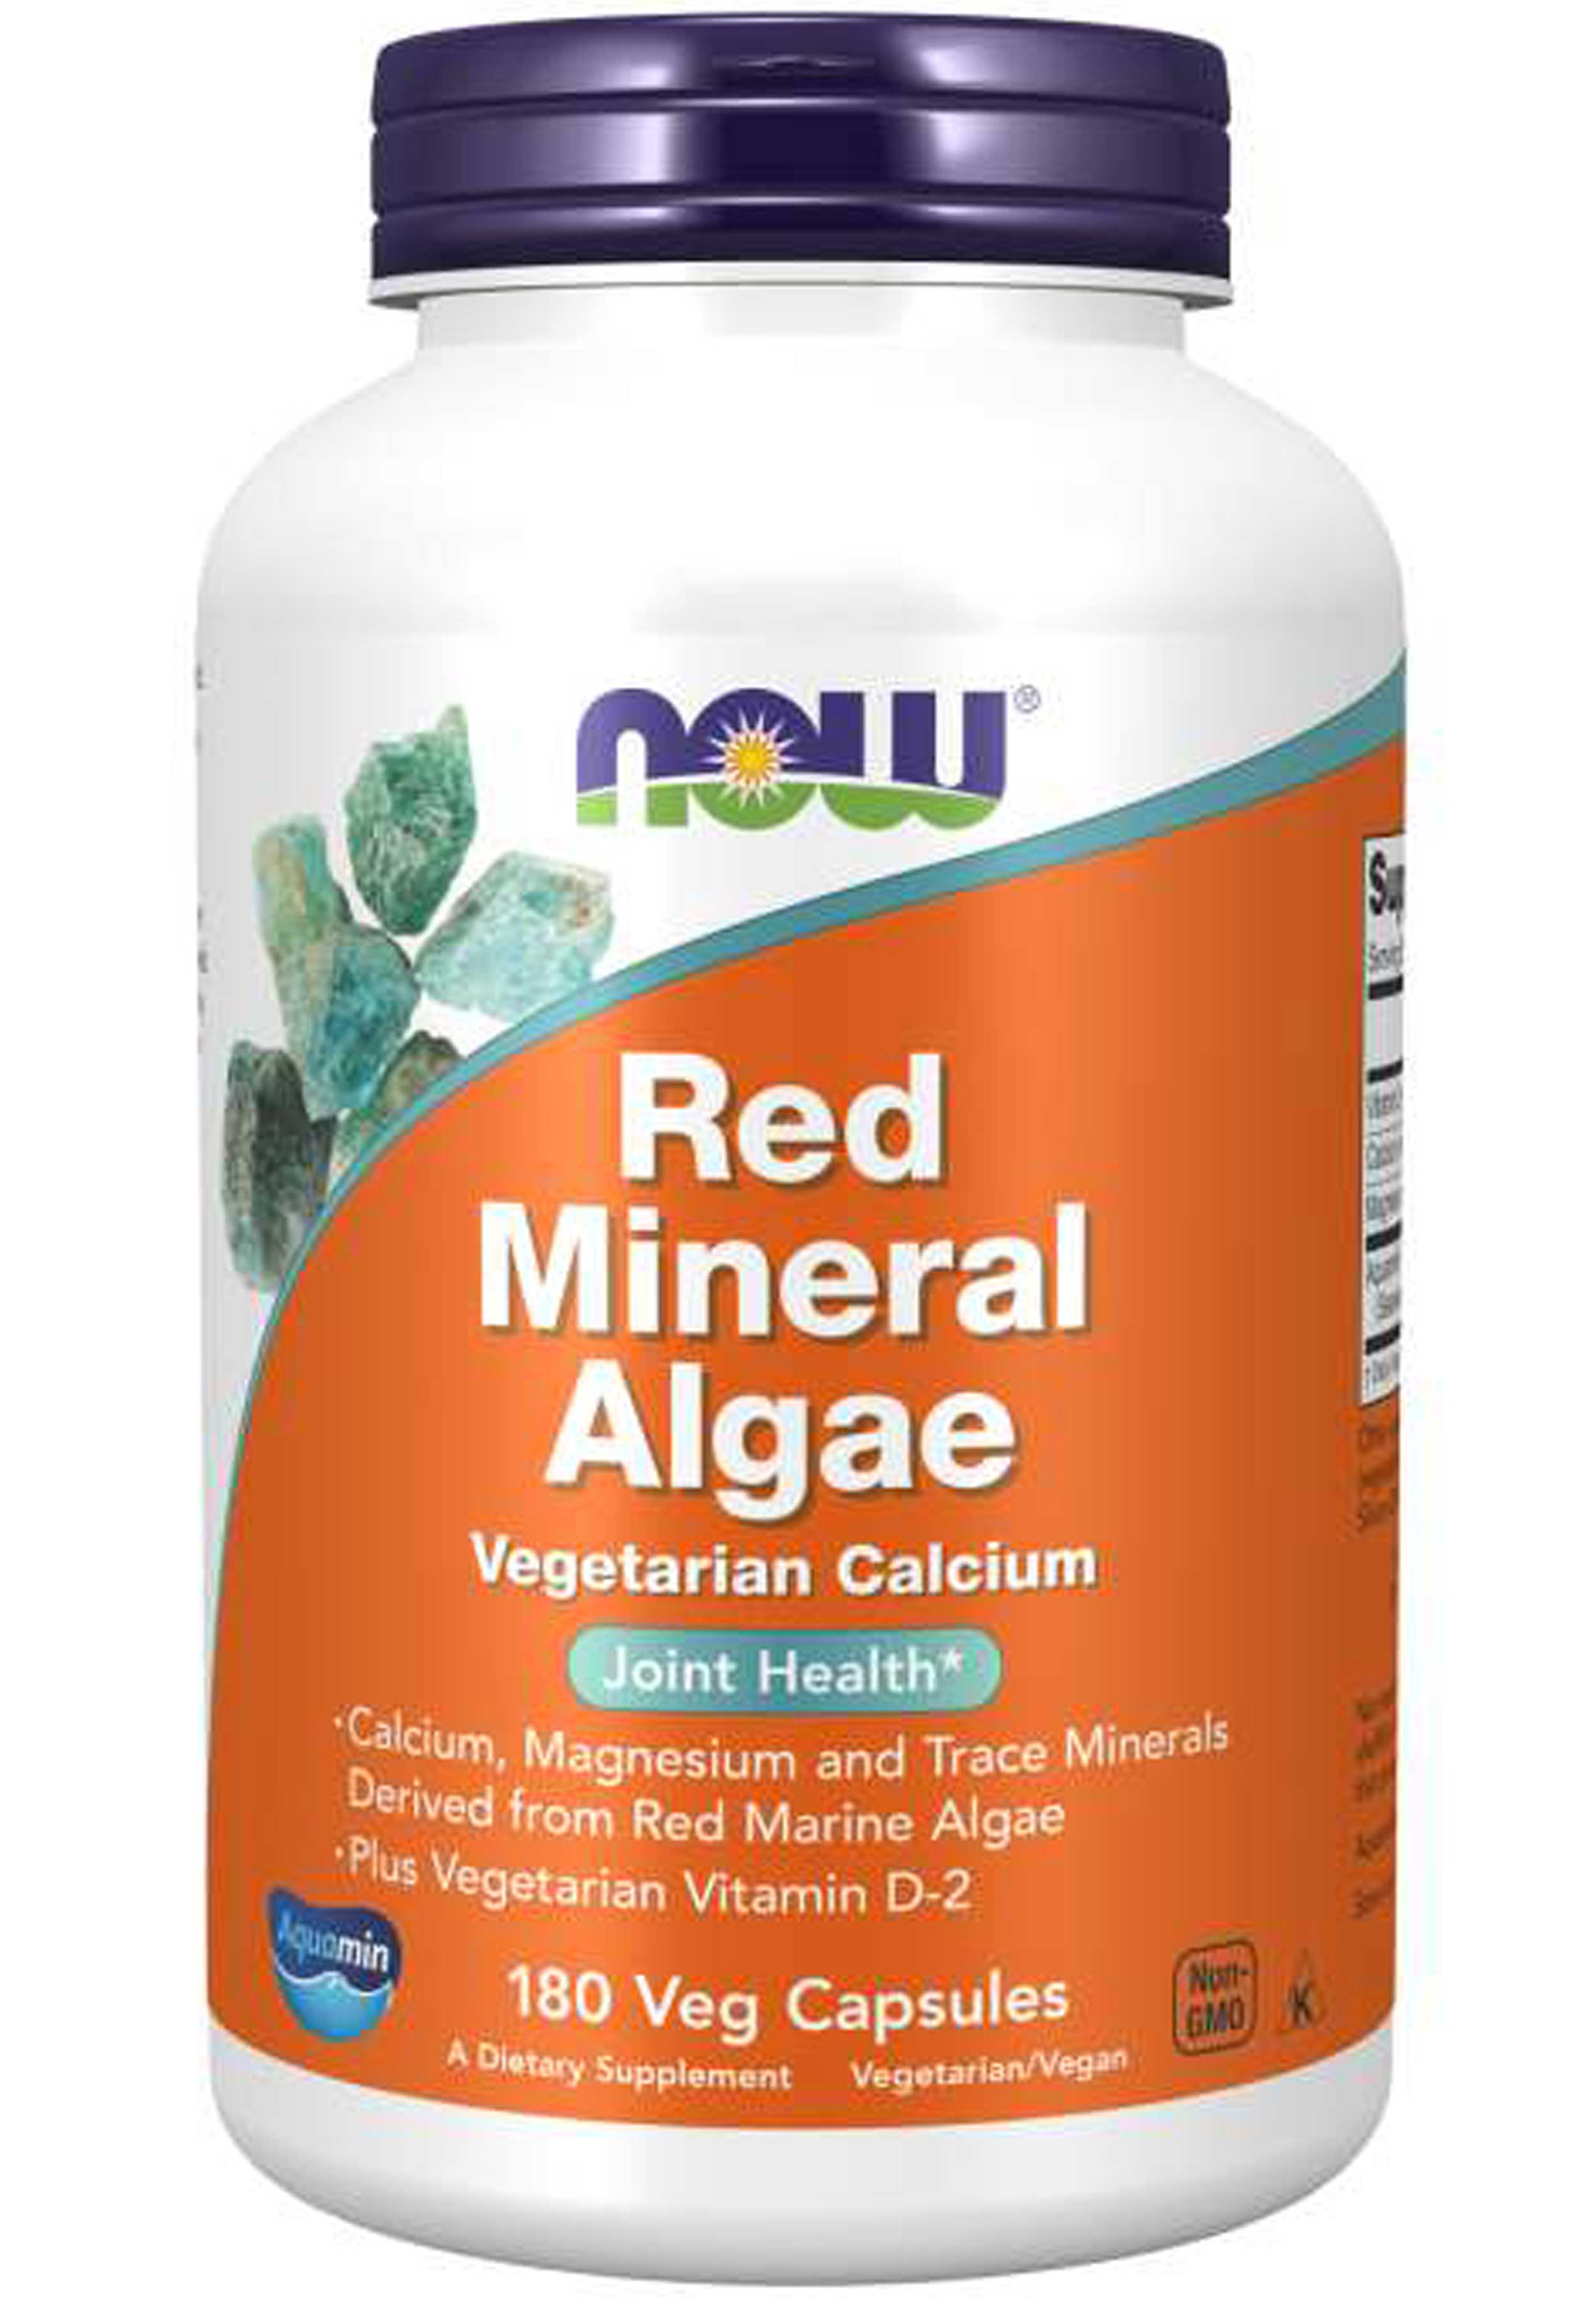 NOW Red Mineral Algae